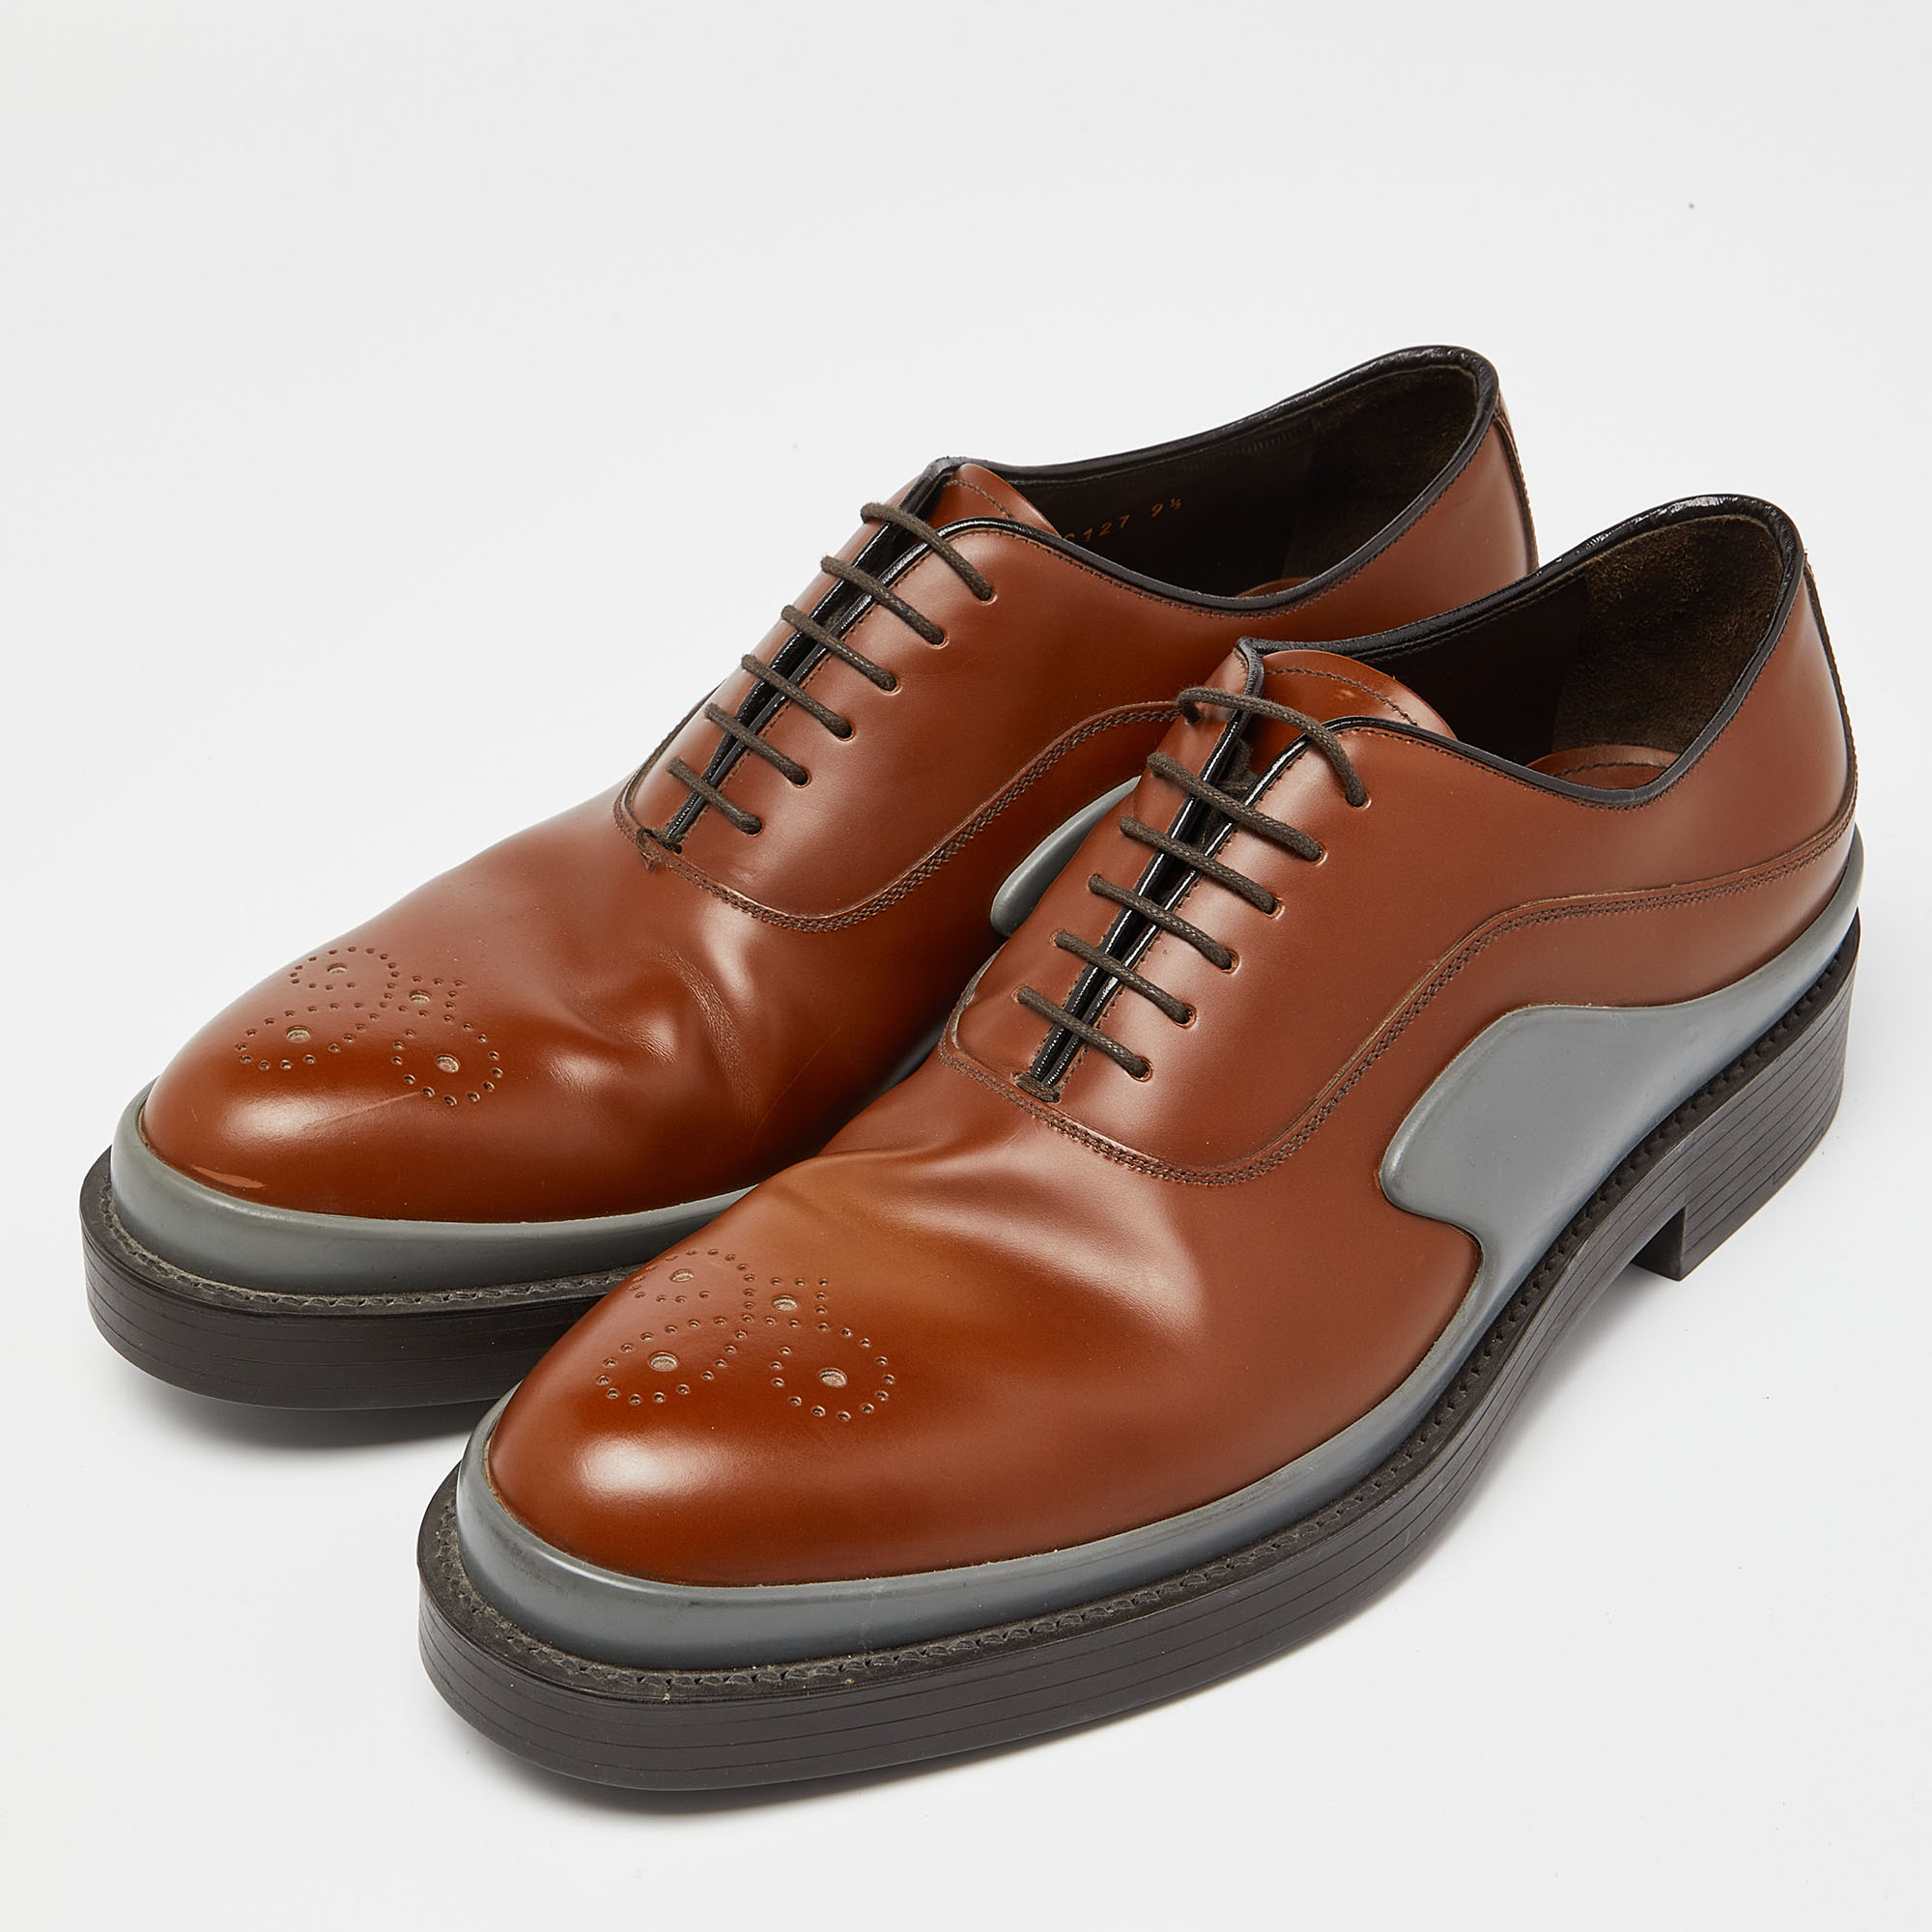 

Prada Brown Leather Lace Up Oxfords Size